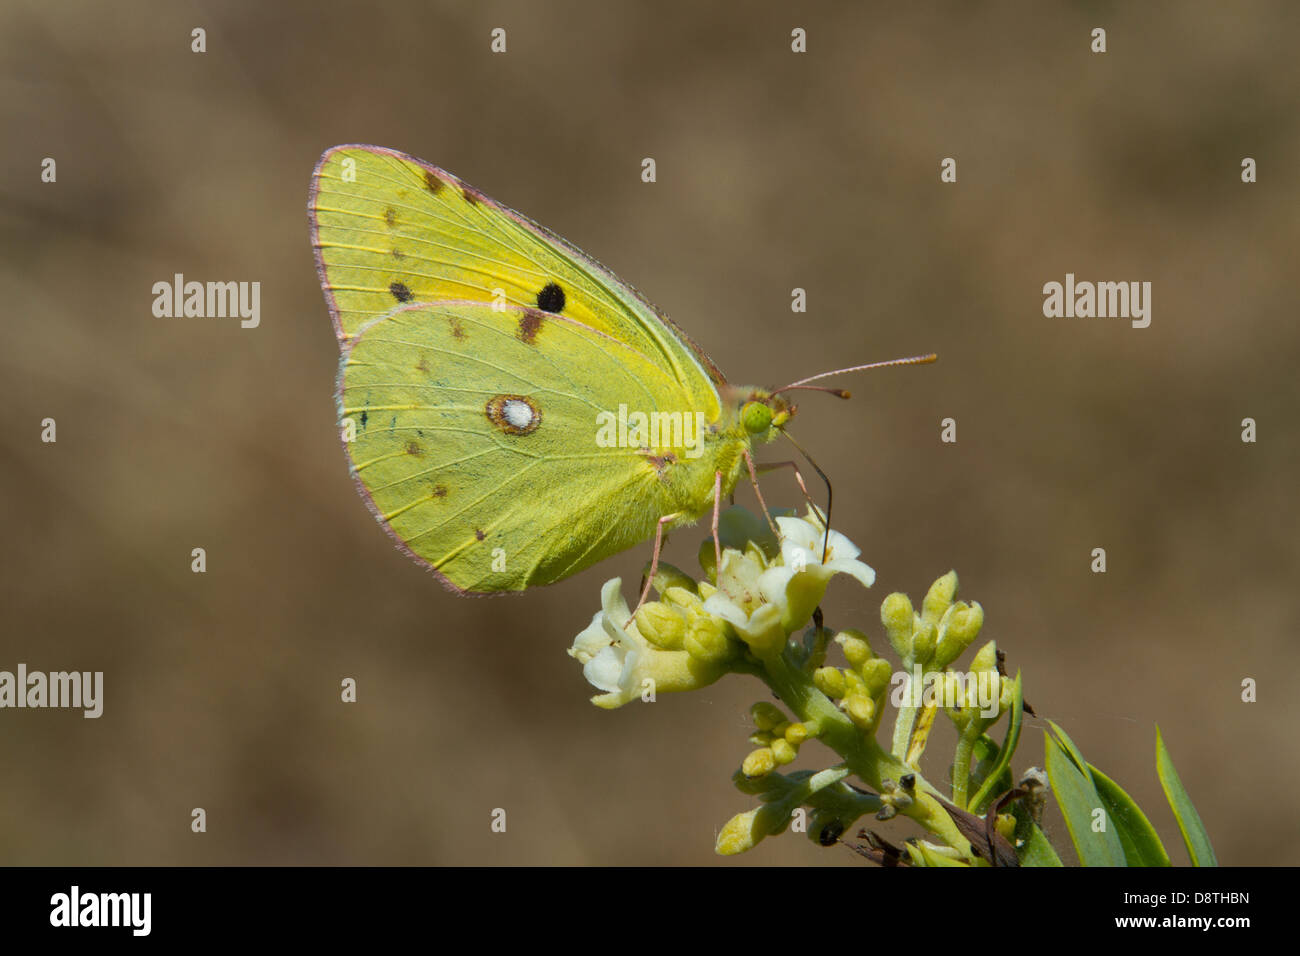 A clouded yellow rests momentarily on a flower stem Stock Photo